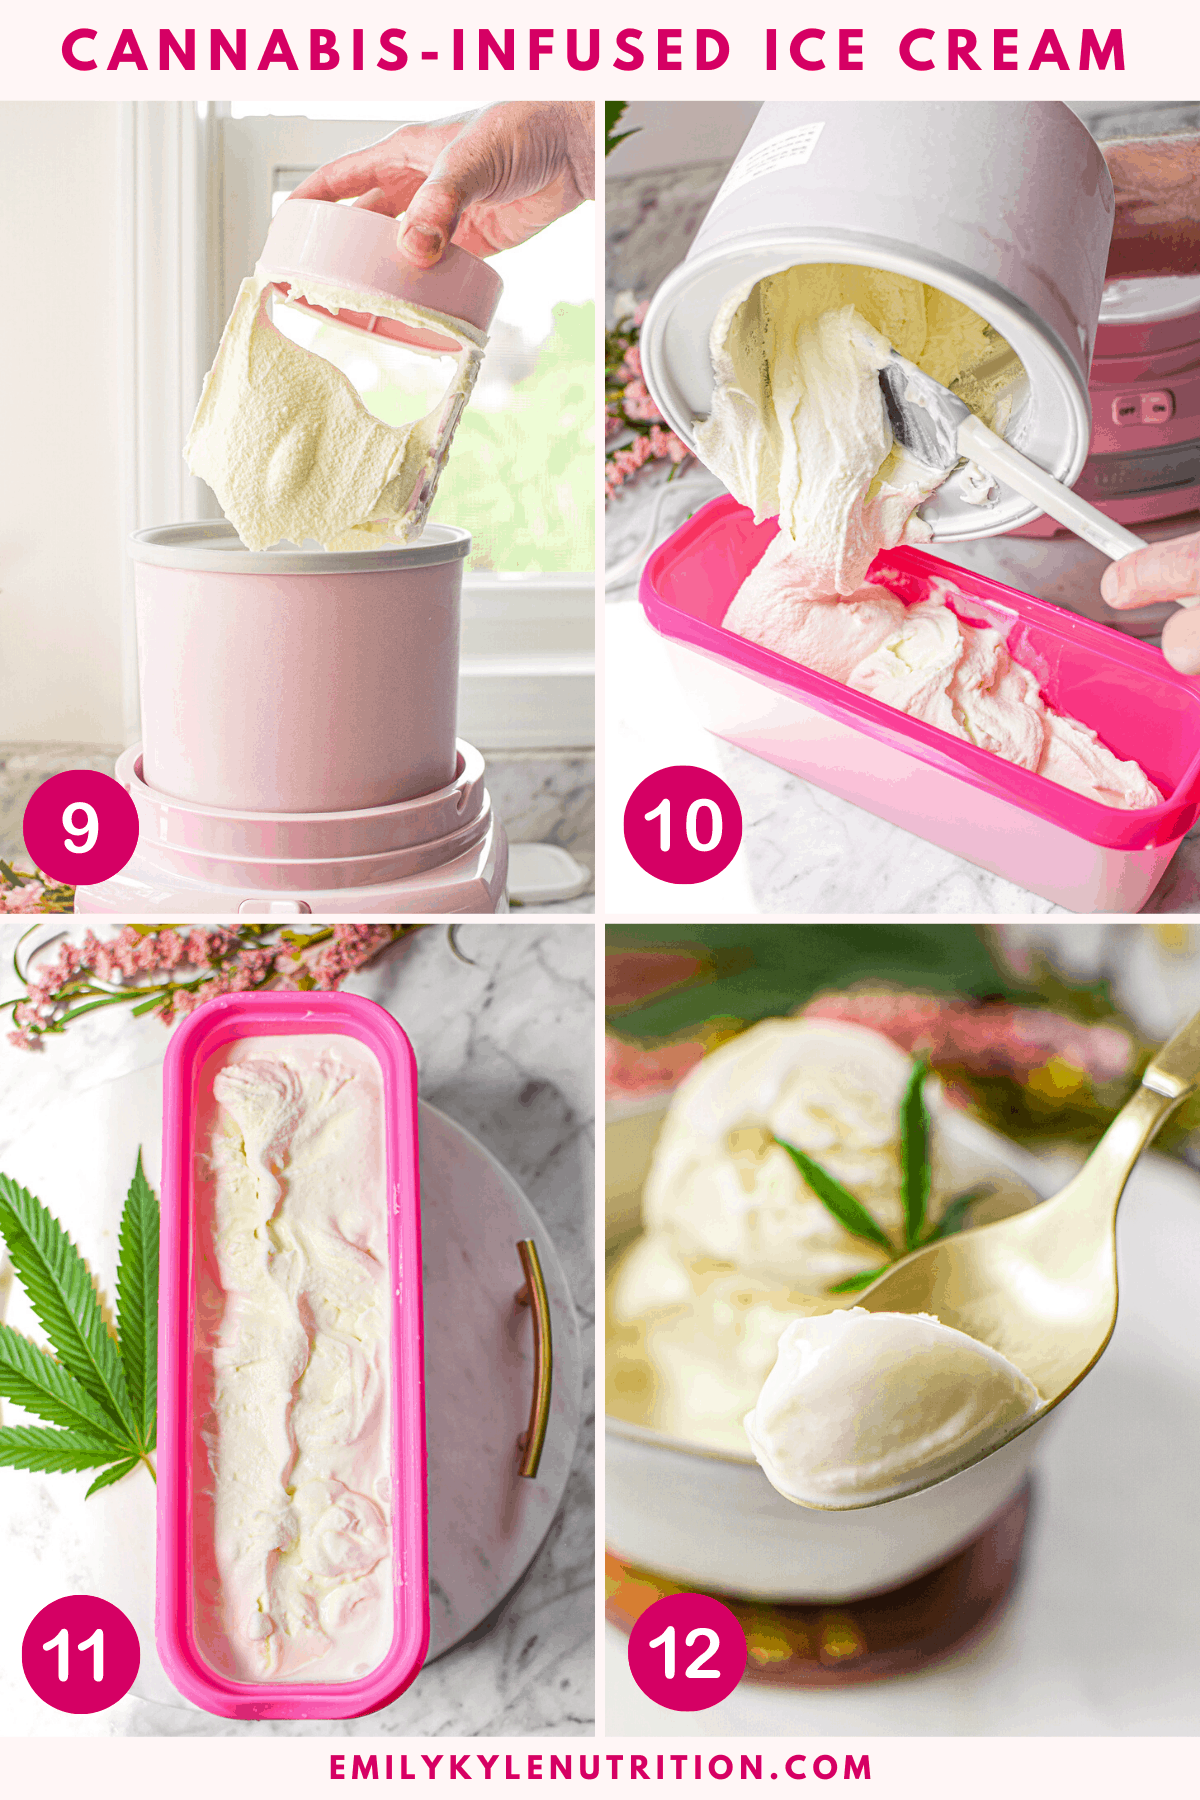 A collage shot of steps 1-4 showing how to make cannabis ice cream